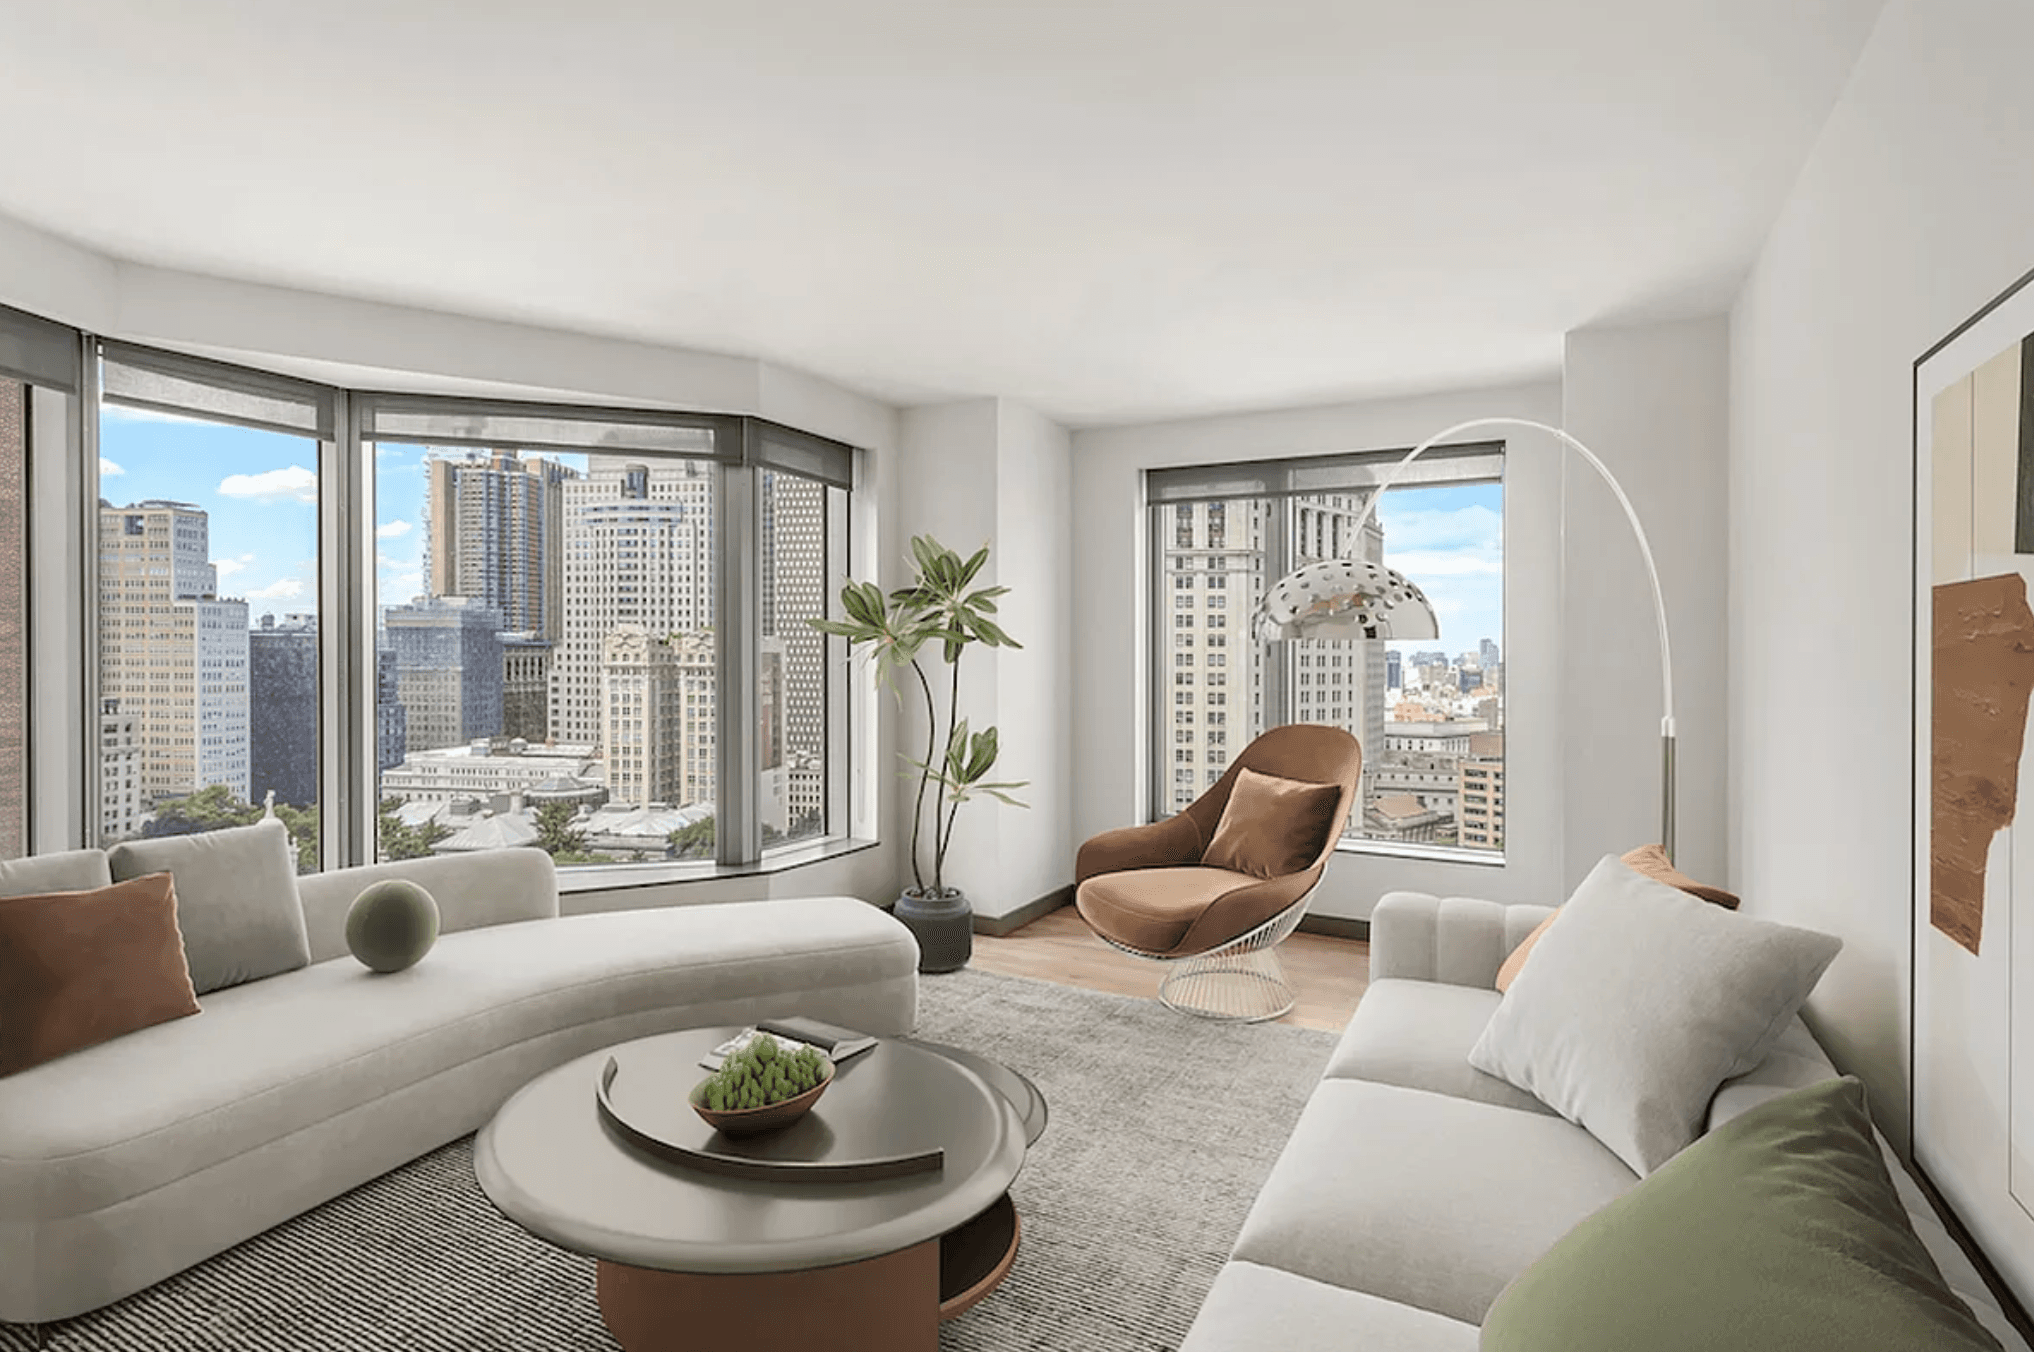 Stunning View at this FiDi Apartment